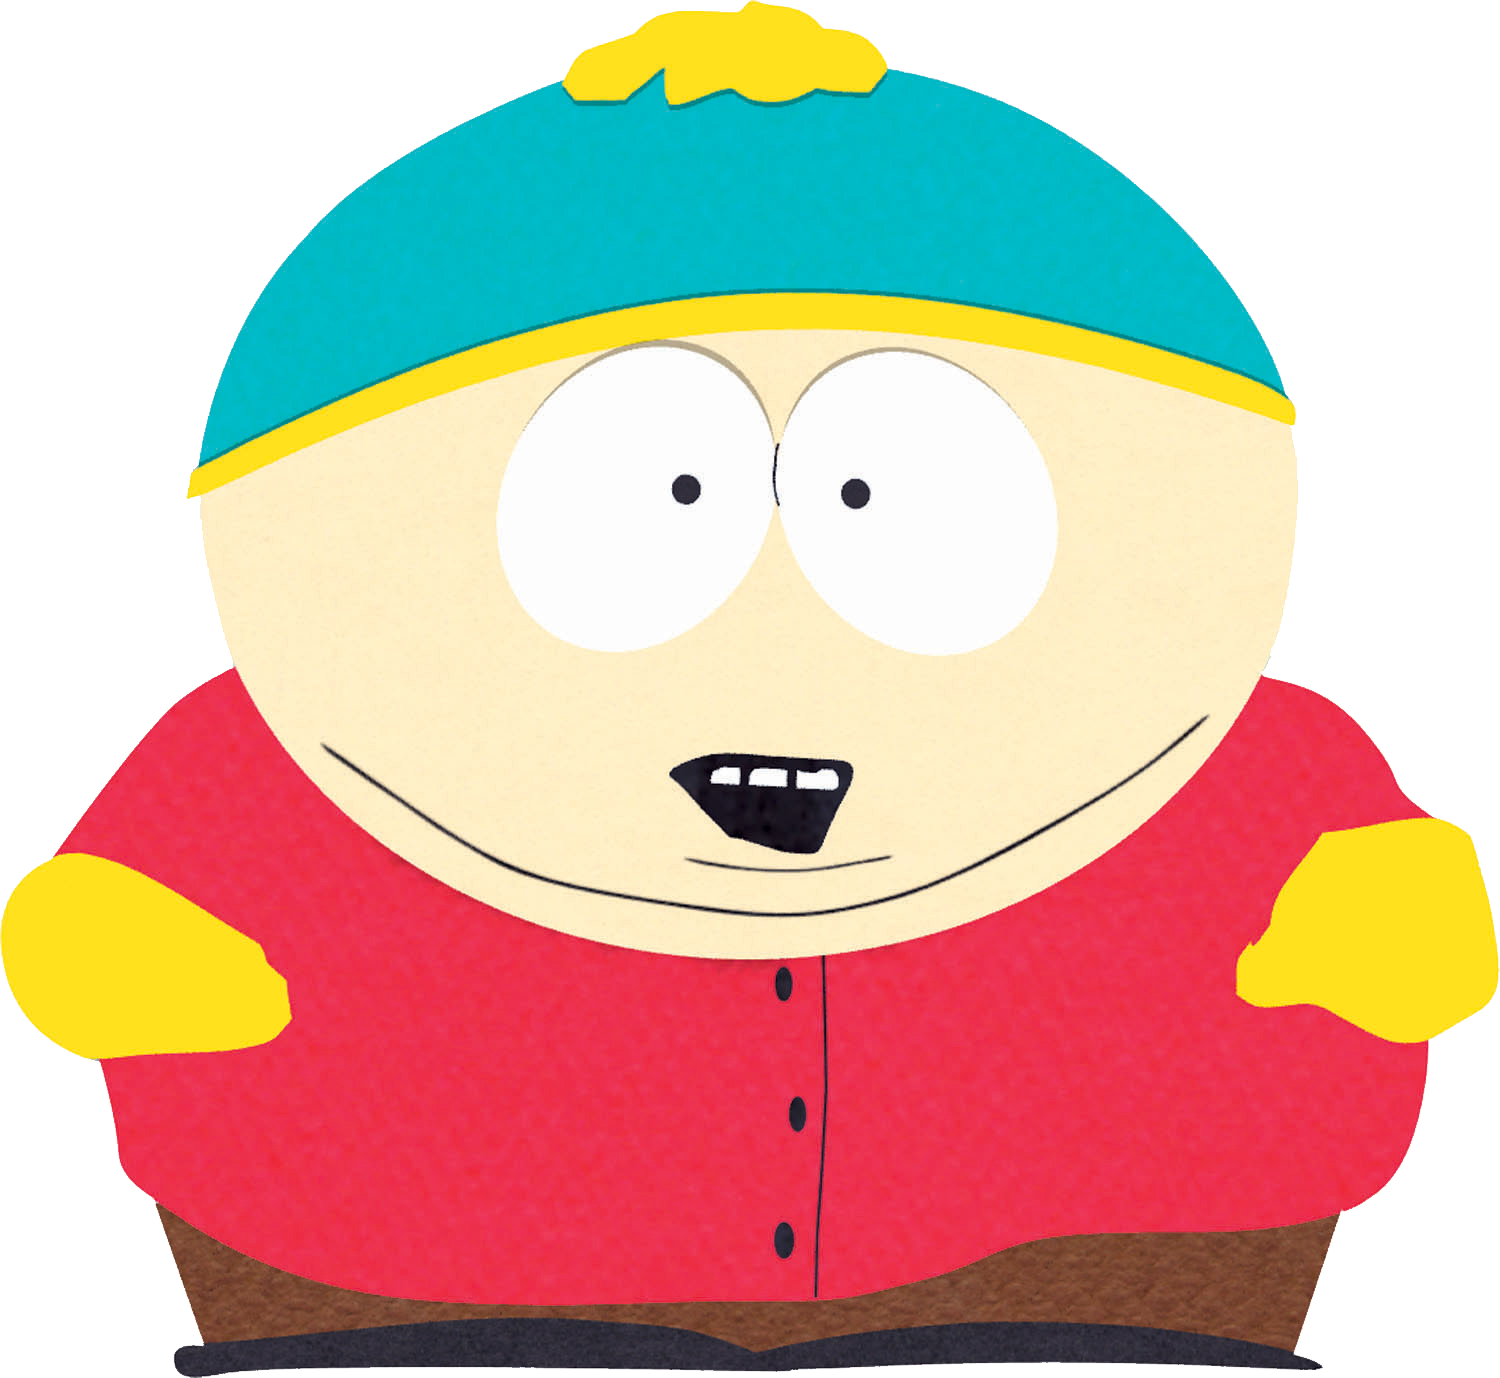 portal-characters-major-characters-south-park-archives-fandom-powered-by-wikia